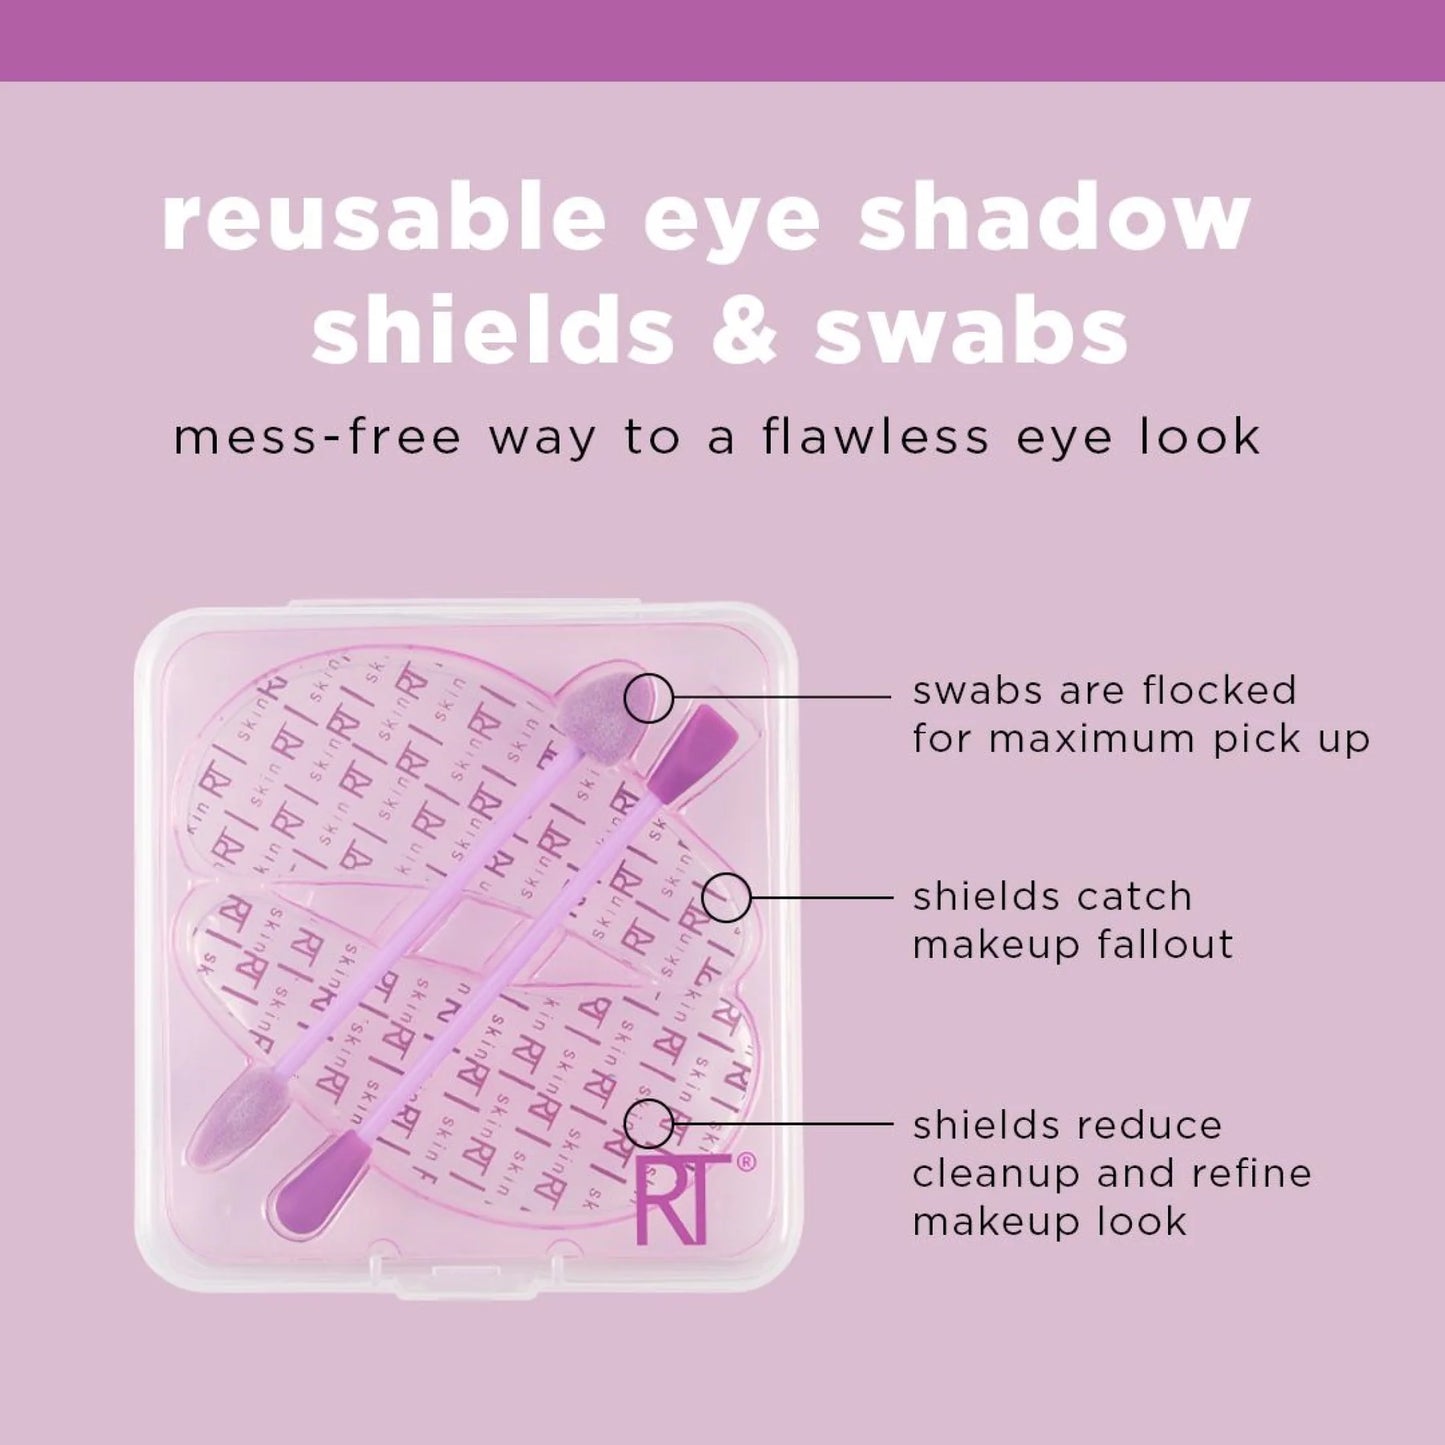 Real Techniques Reusable Eye Shields + Swabs